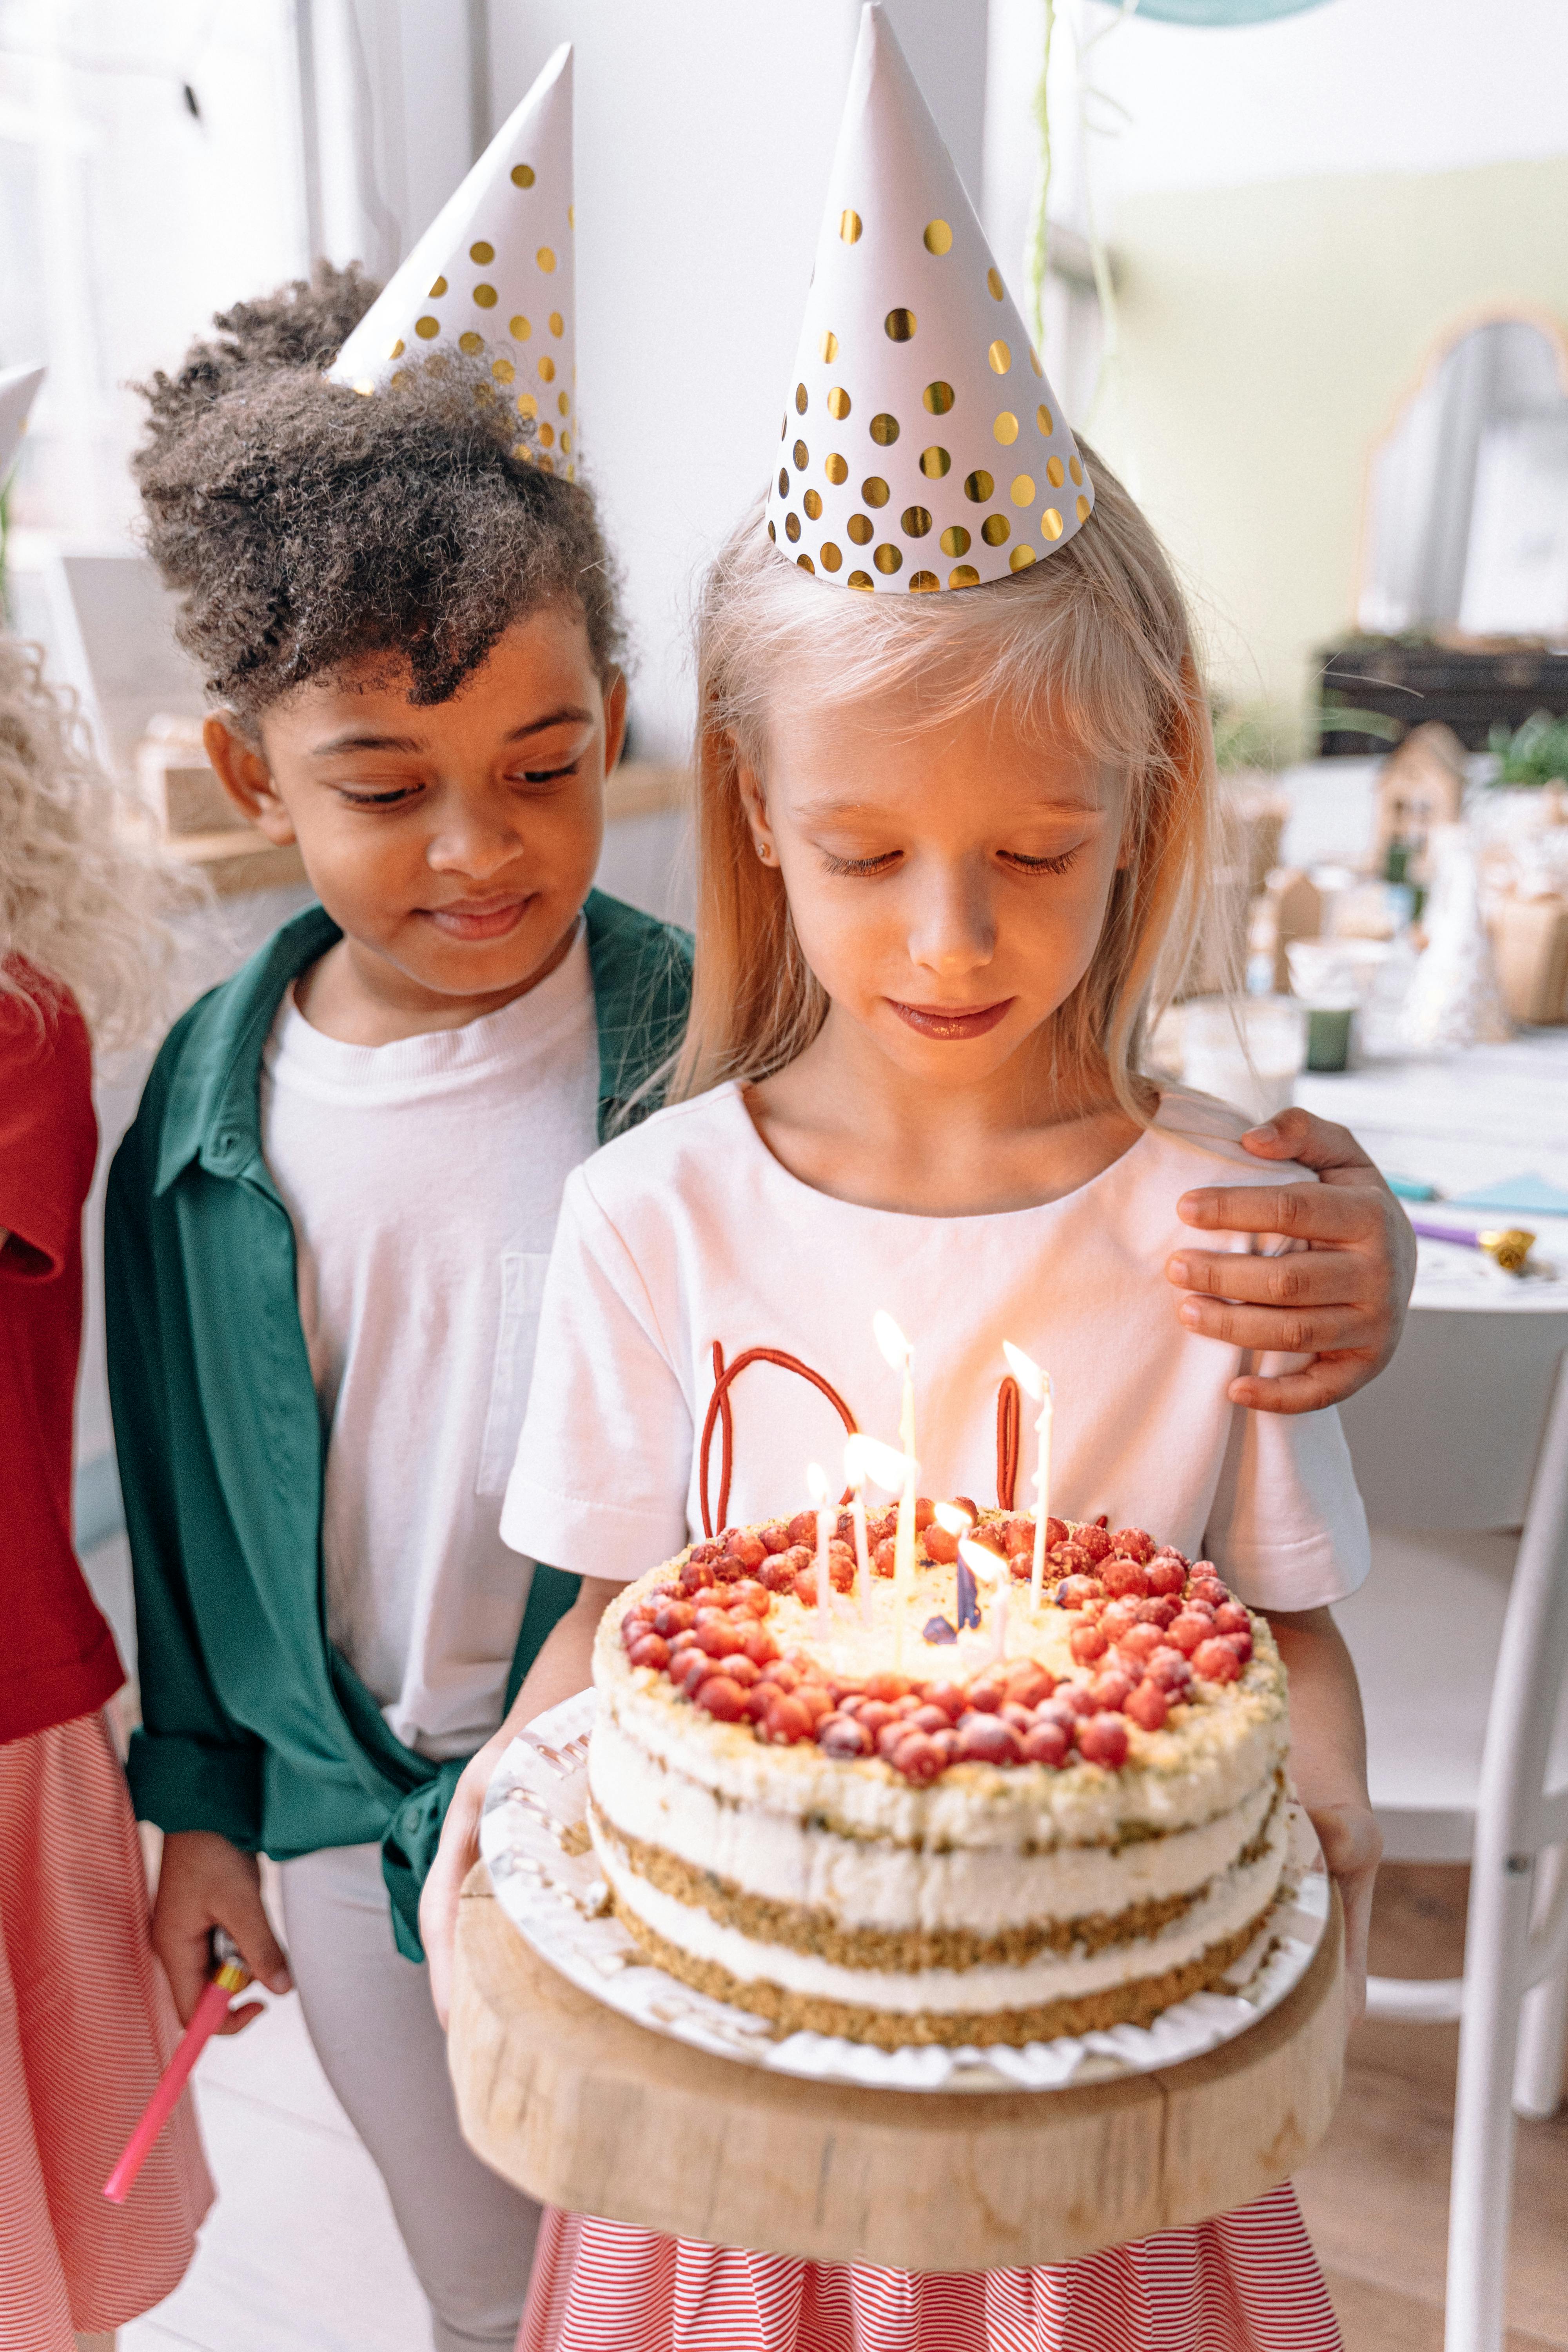 43,544 Cut Birthday Cake Images, Stock Photos, 3D objects, & Vectors |  Shutterstock